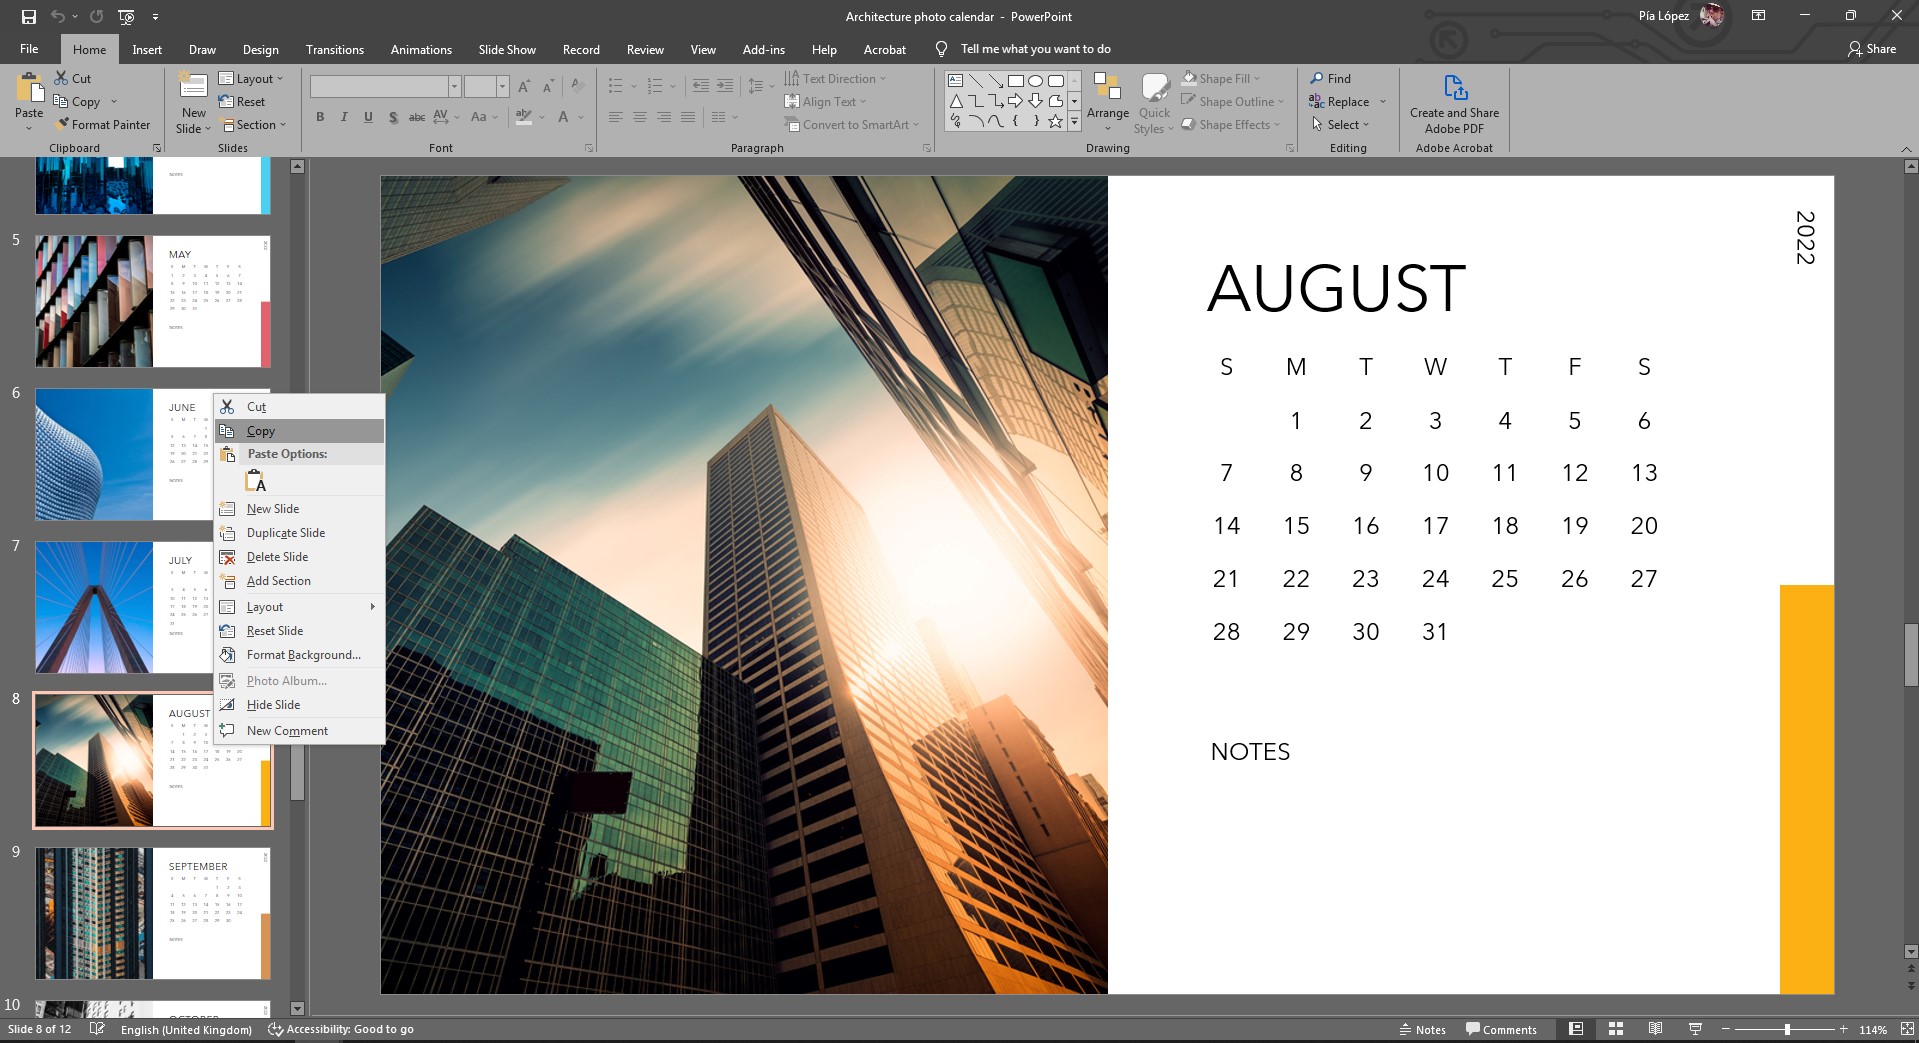 Copying the calendar file in PowerPoint